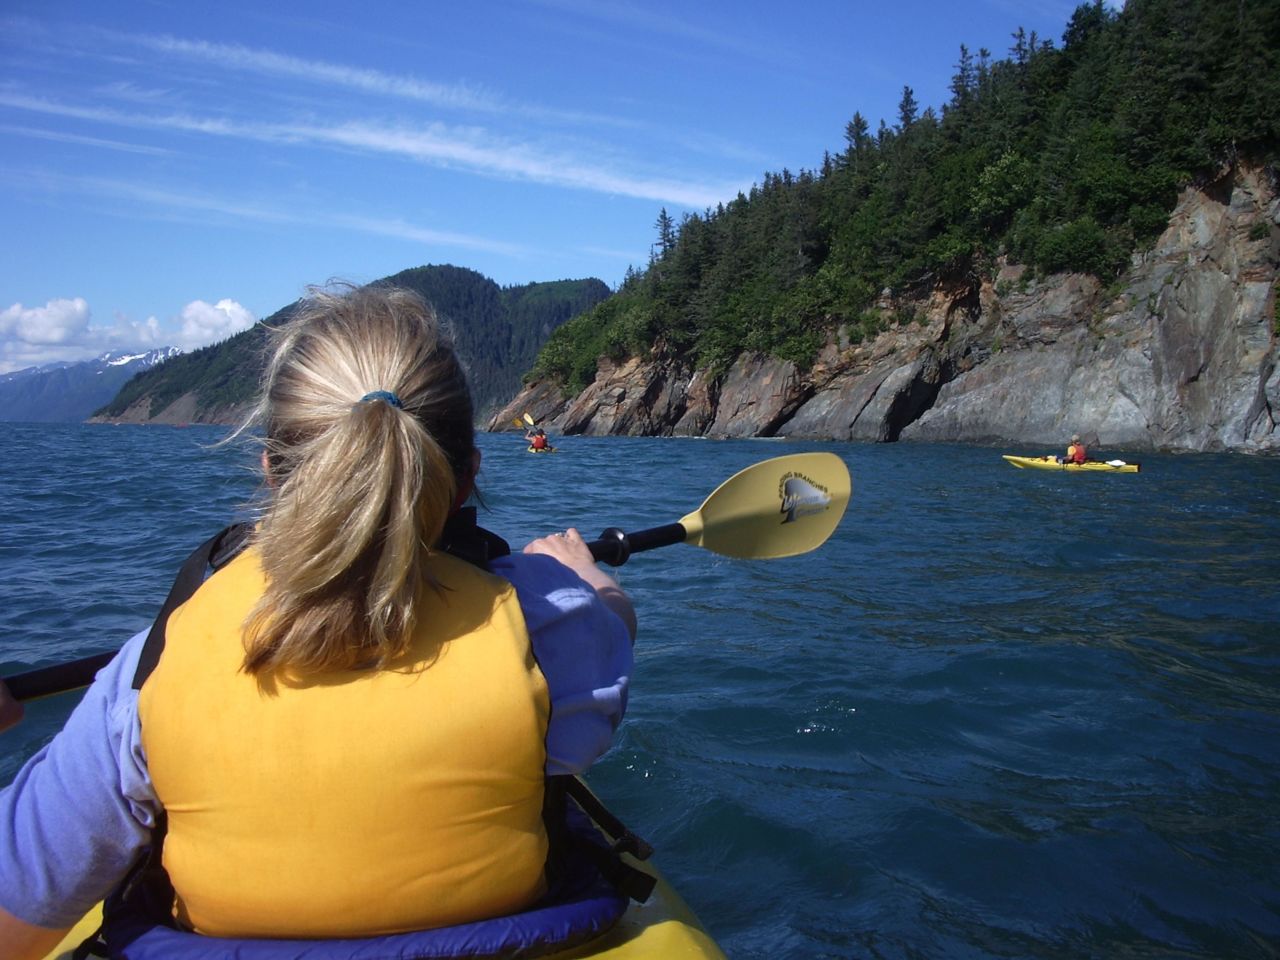 <strong>Paddling: </strong>Spotting orcas is a real treat for kayakers. Although orca sightings are not guaranteed, other wildlife could include humpback whales, porpoises and black bears.